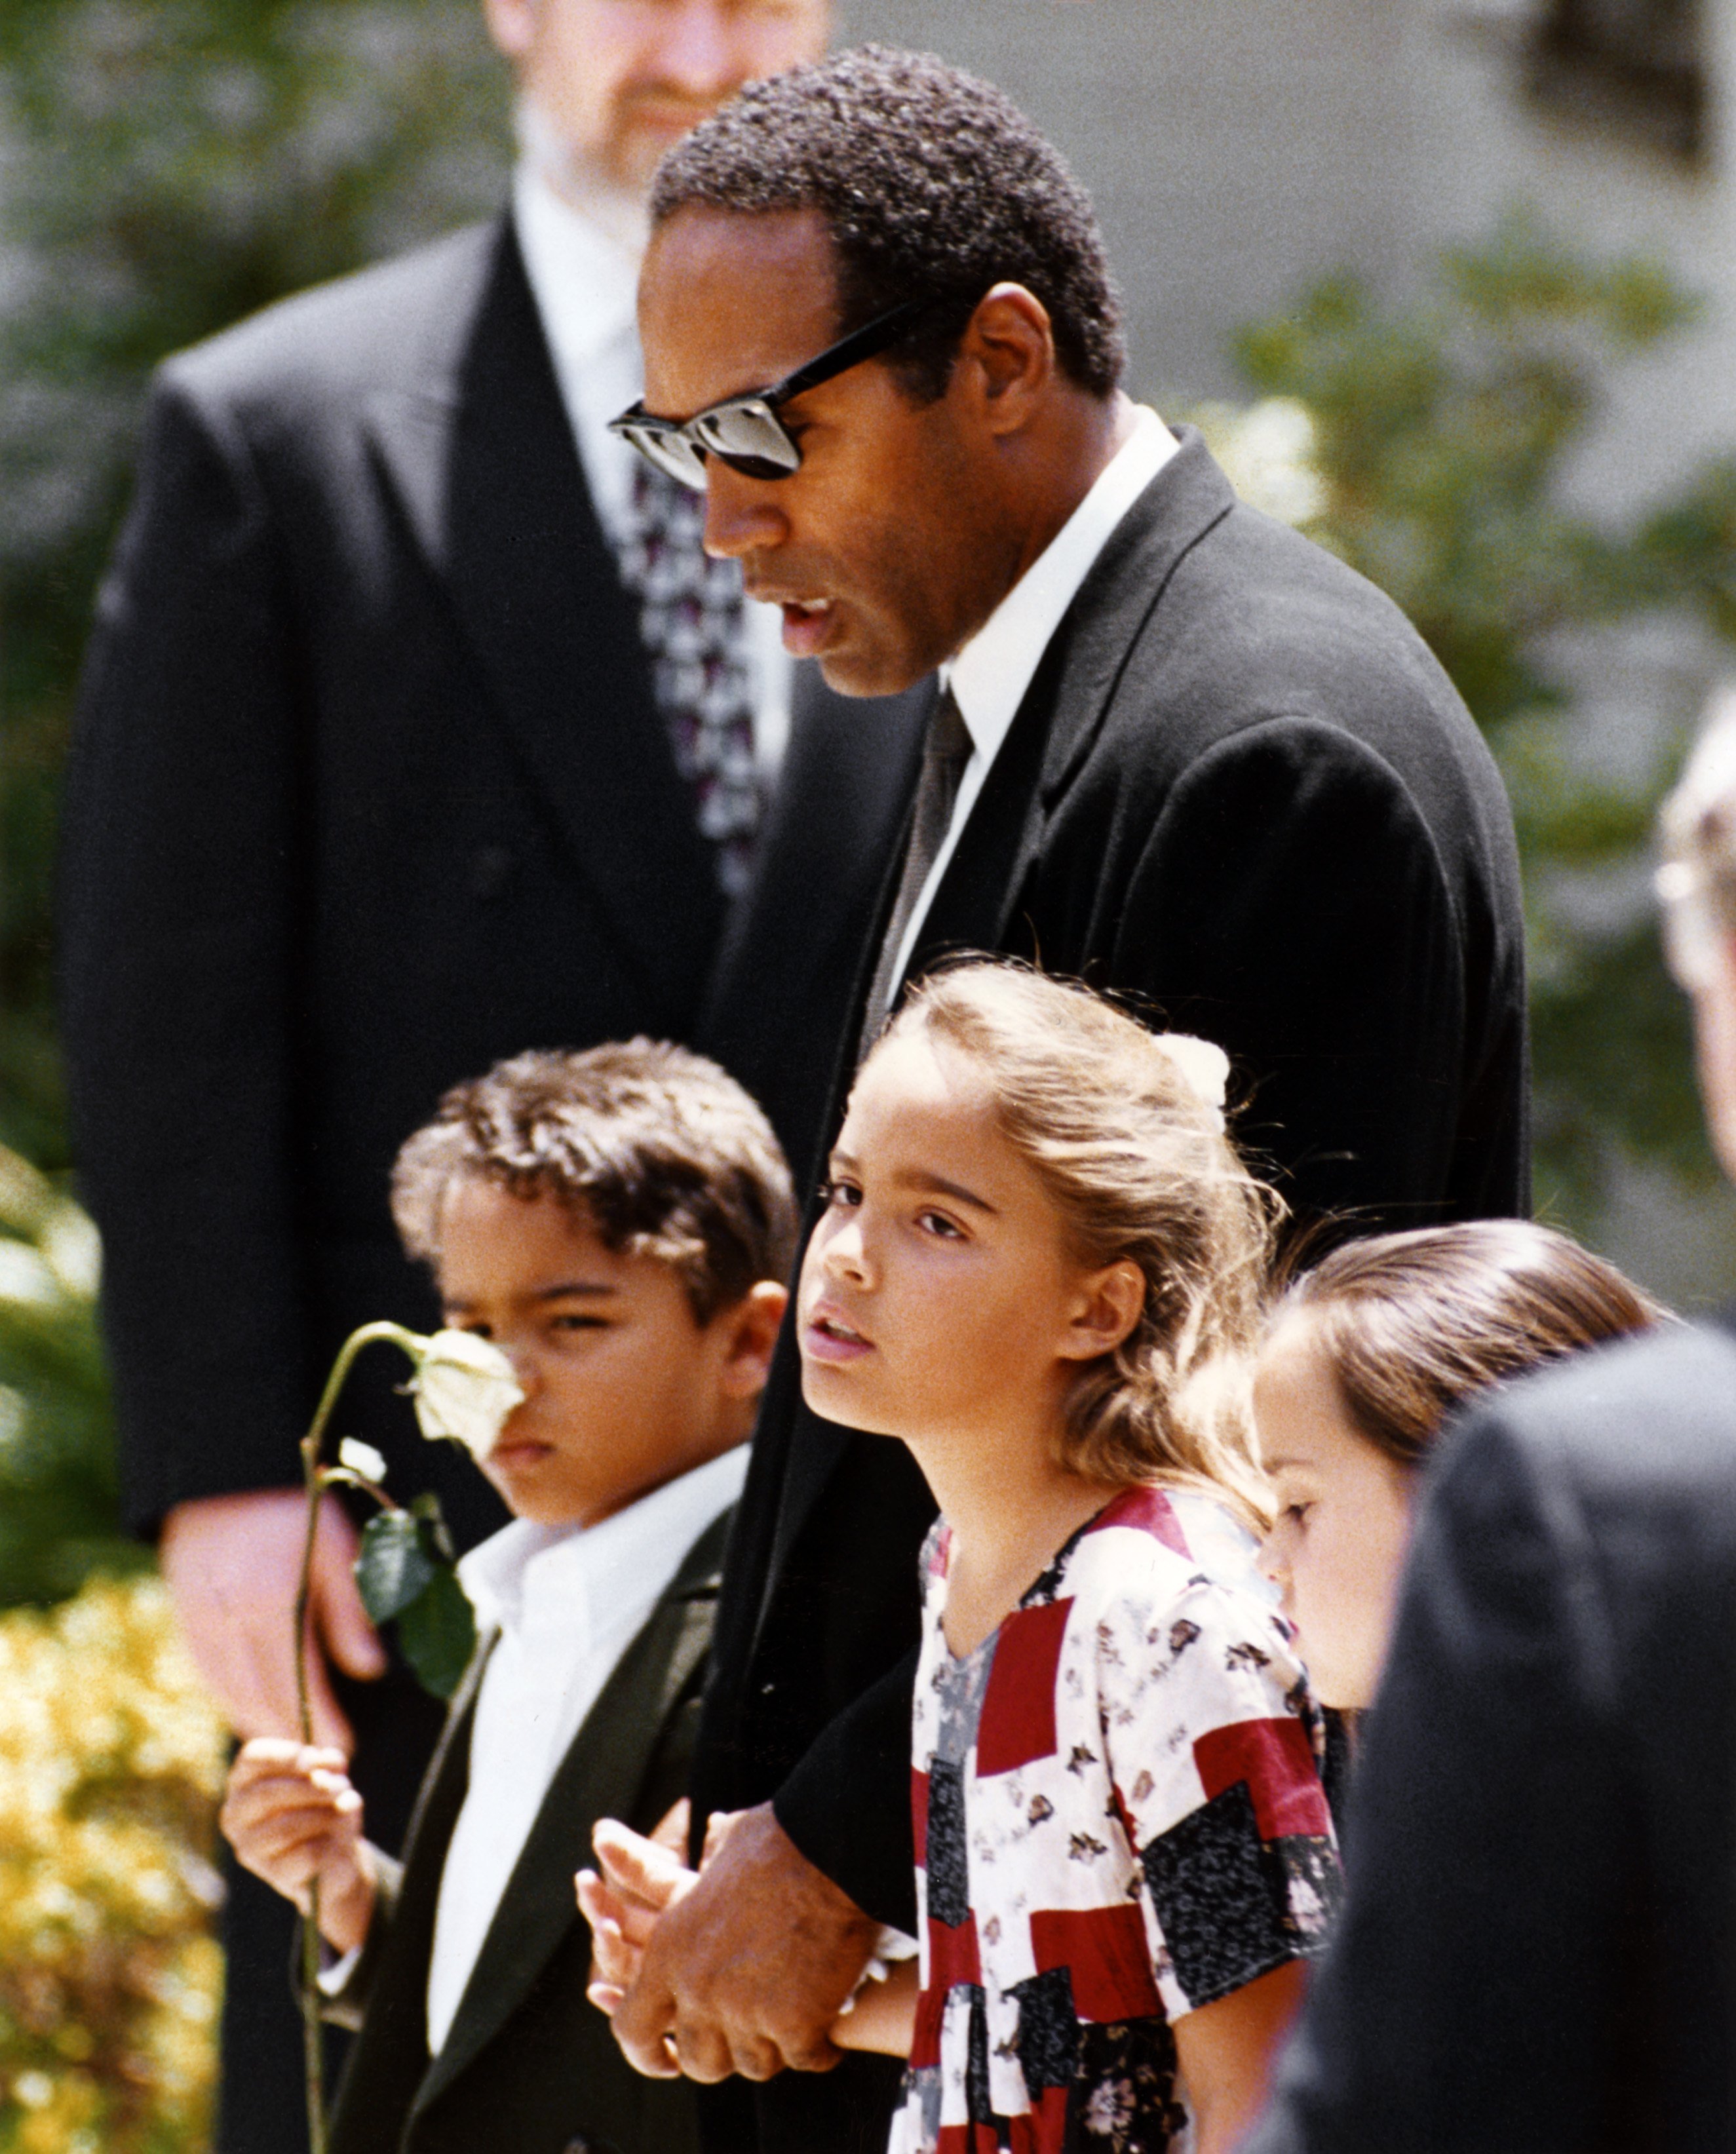 O.J. Simpson with his children Justin and Sydney Simpson at the funeral of their mother, Nicole Brown Simpson on June 16, 1994, in Los Angeles, California. | Source: Getty Images